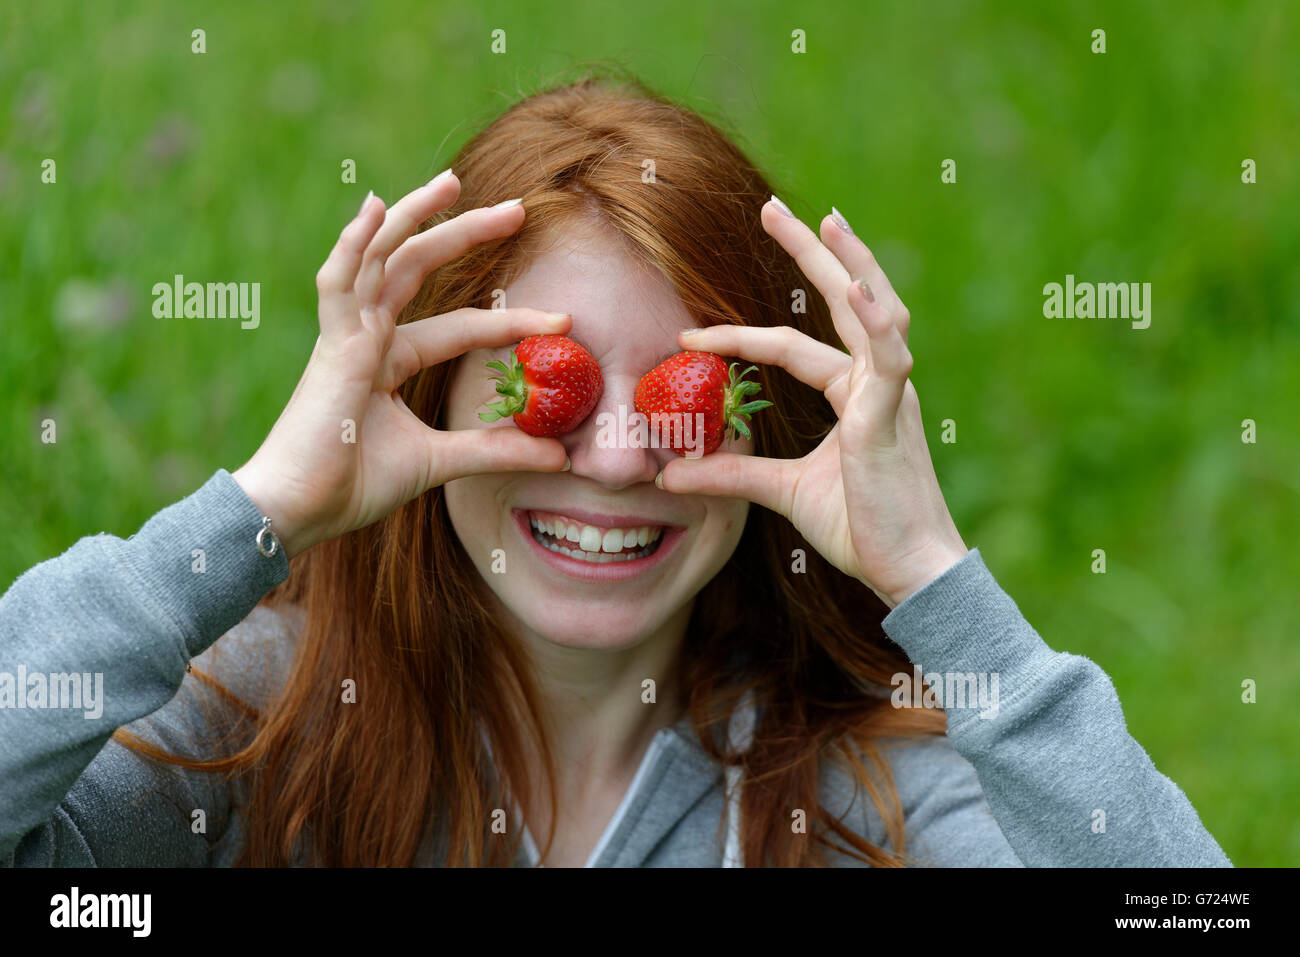 Young girl, female teenager with strawberries in front of the eyes, Bavaria, Germany Stock Photo